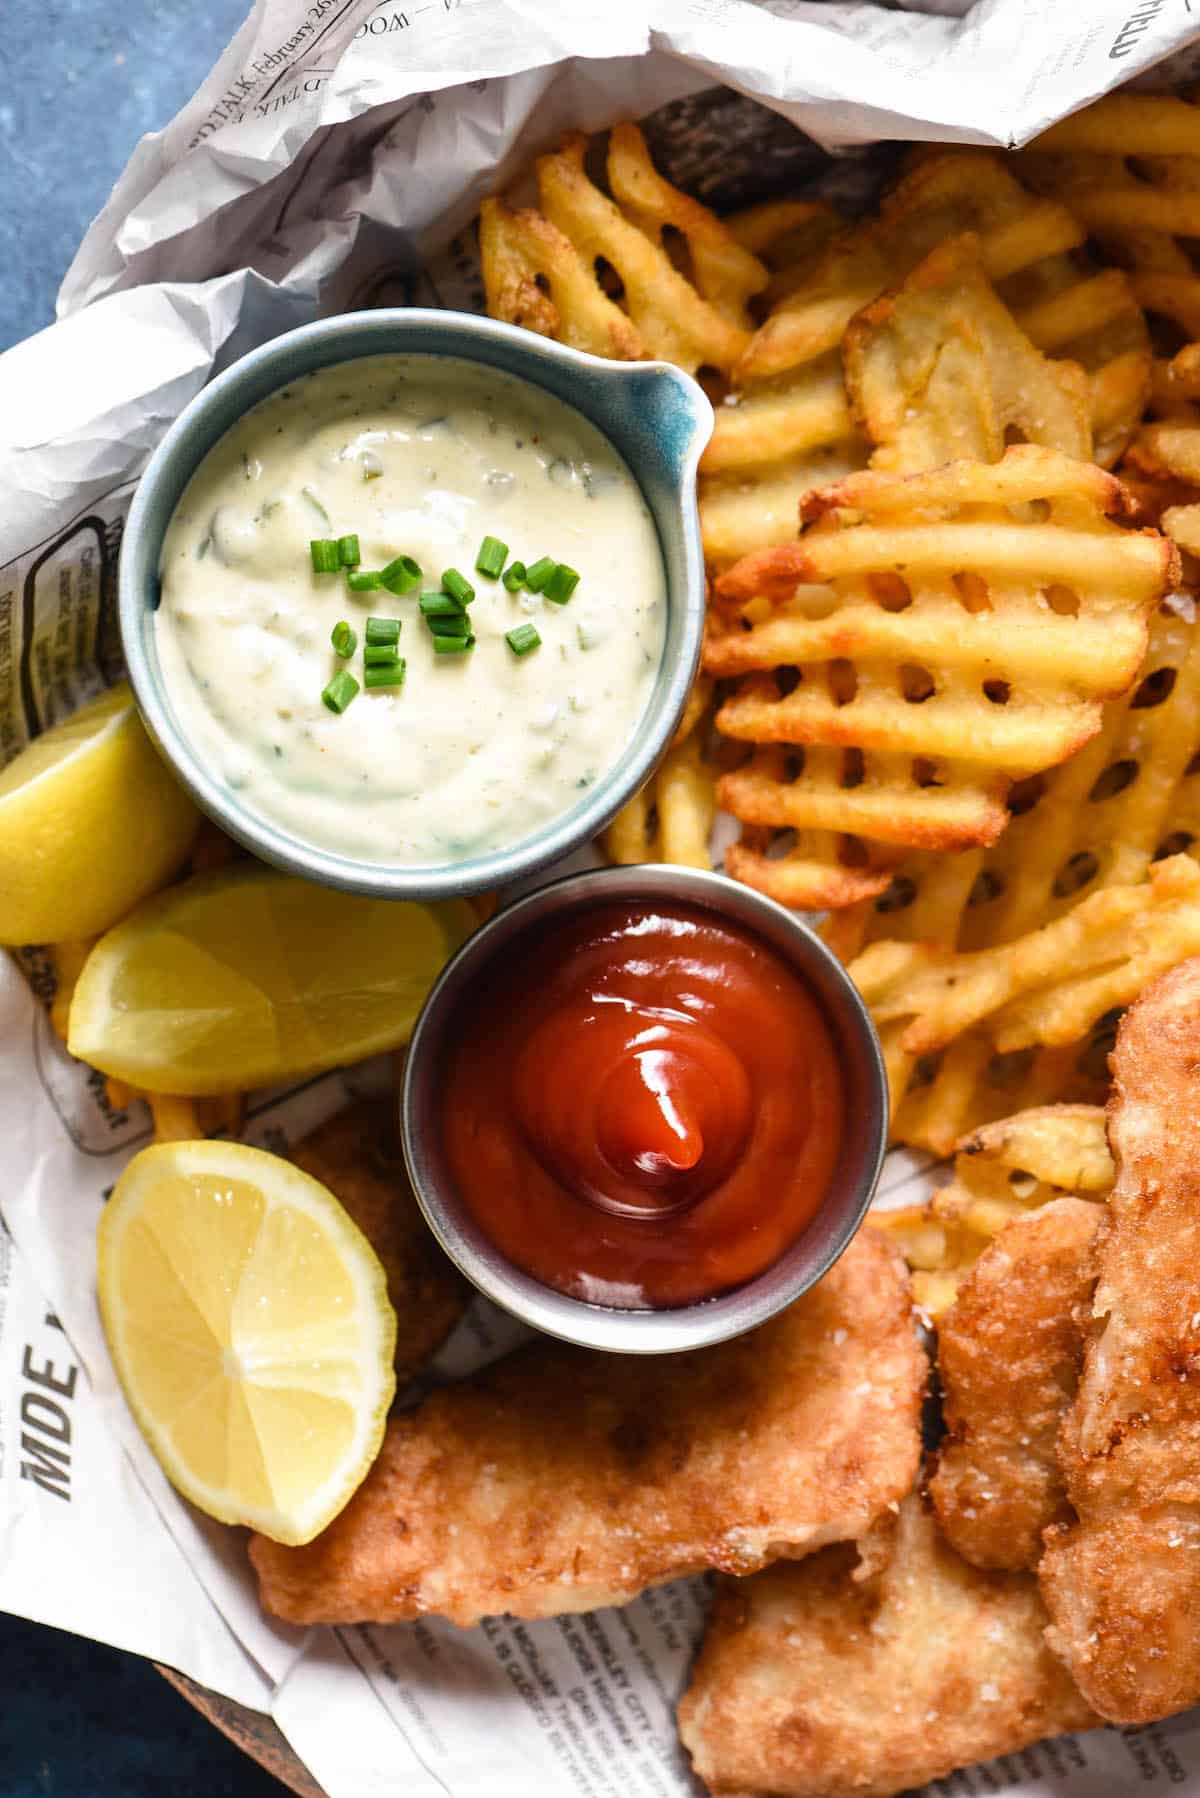 A basket of fried fish and waffle fries with ramekins of ketchup and a recipe for tartar sauce.